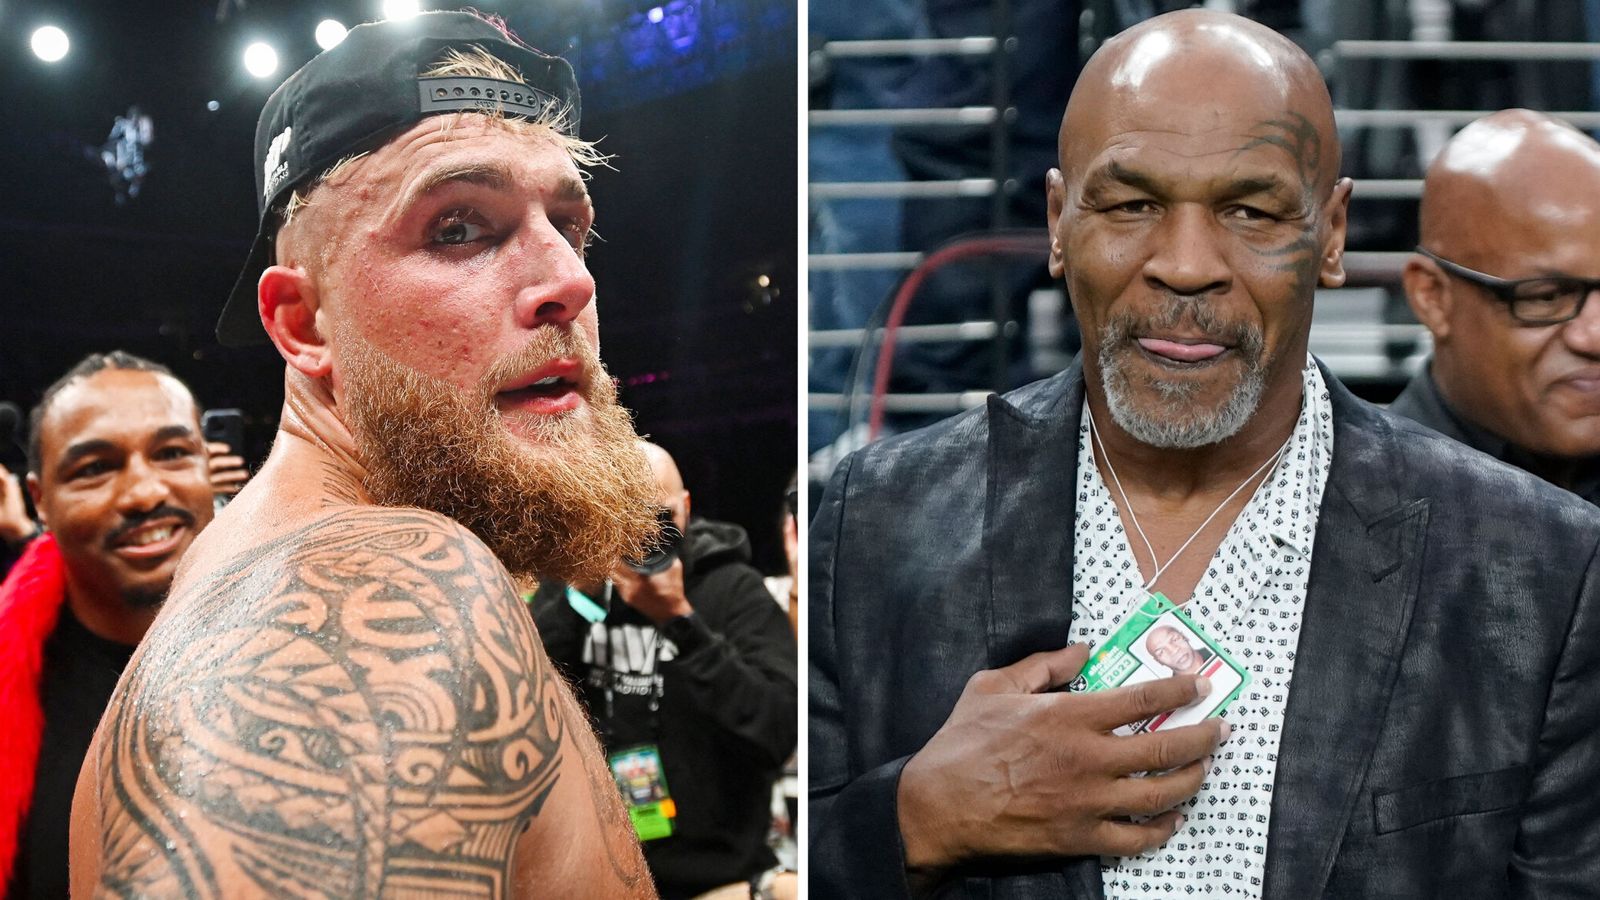 Mike Tyson v Jake Paul sanctioned as professional boxing match - and rules announced